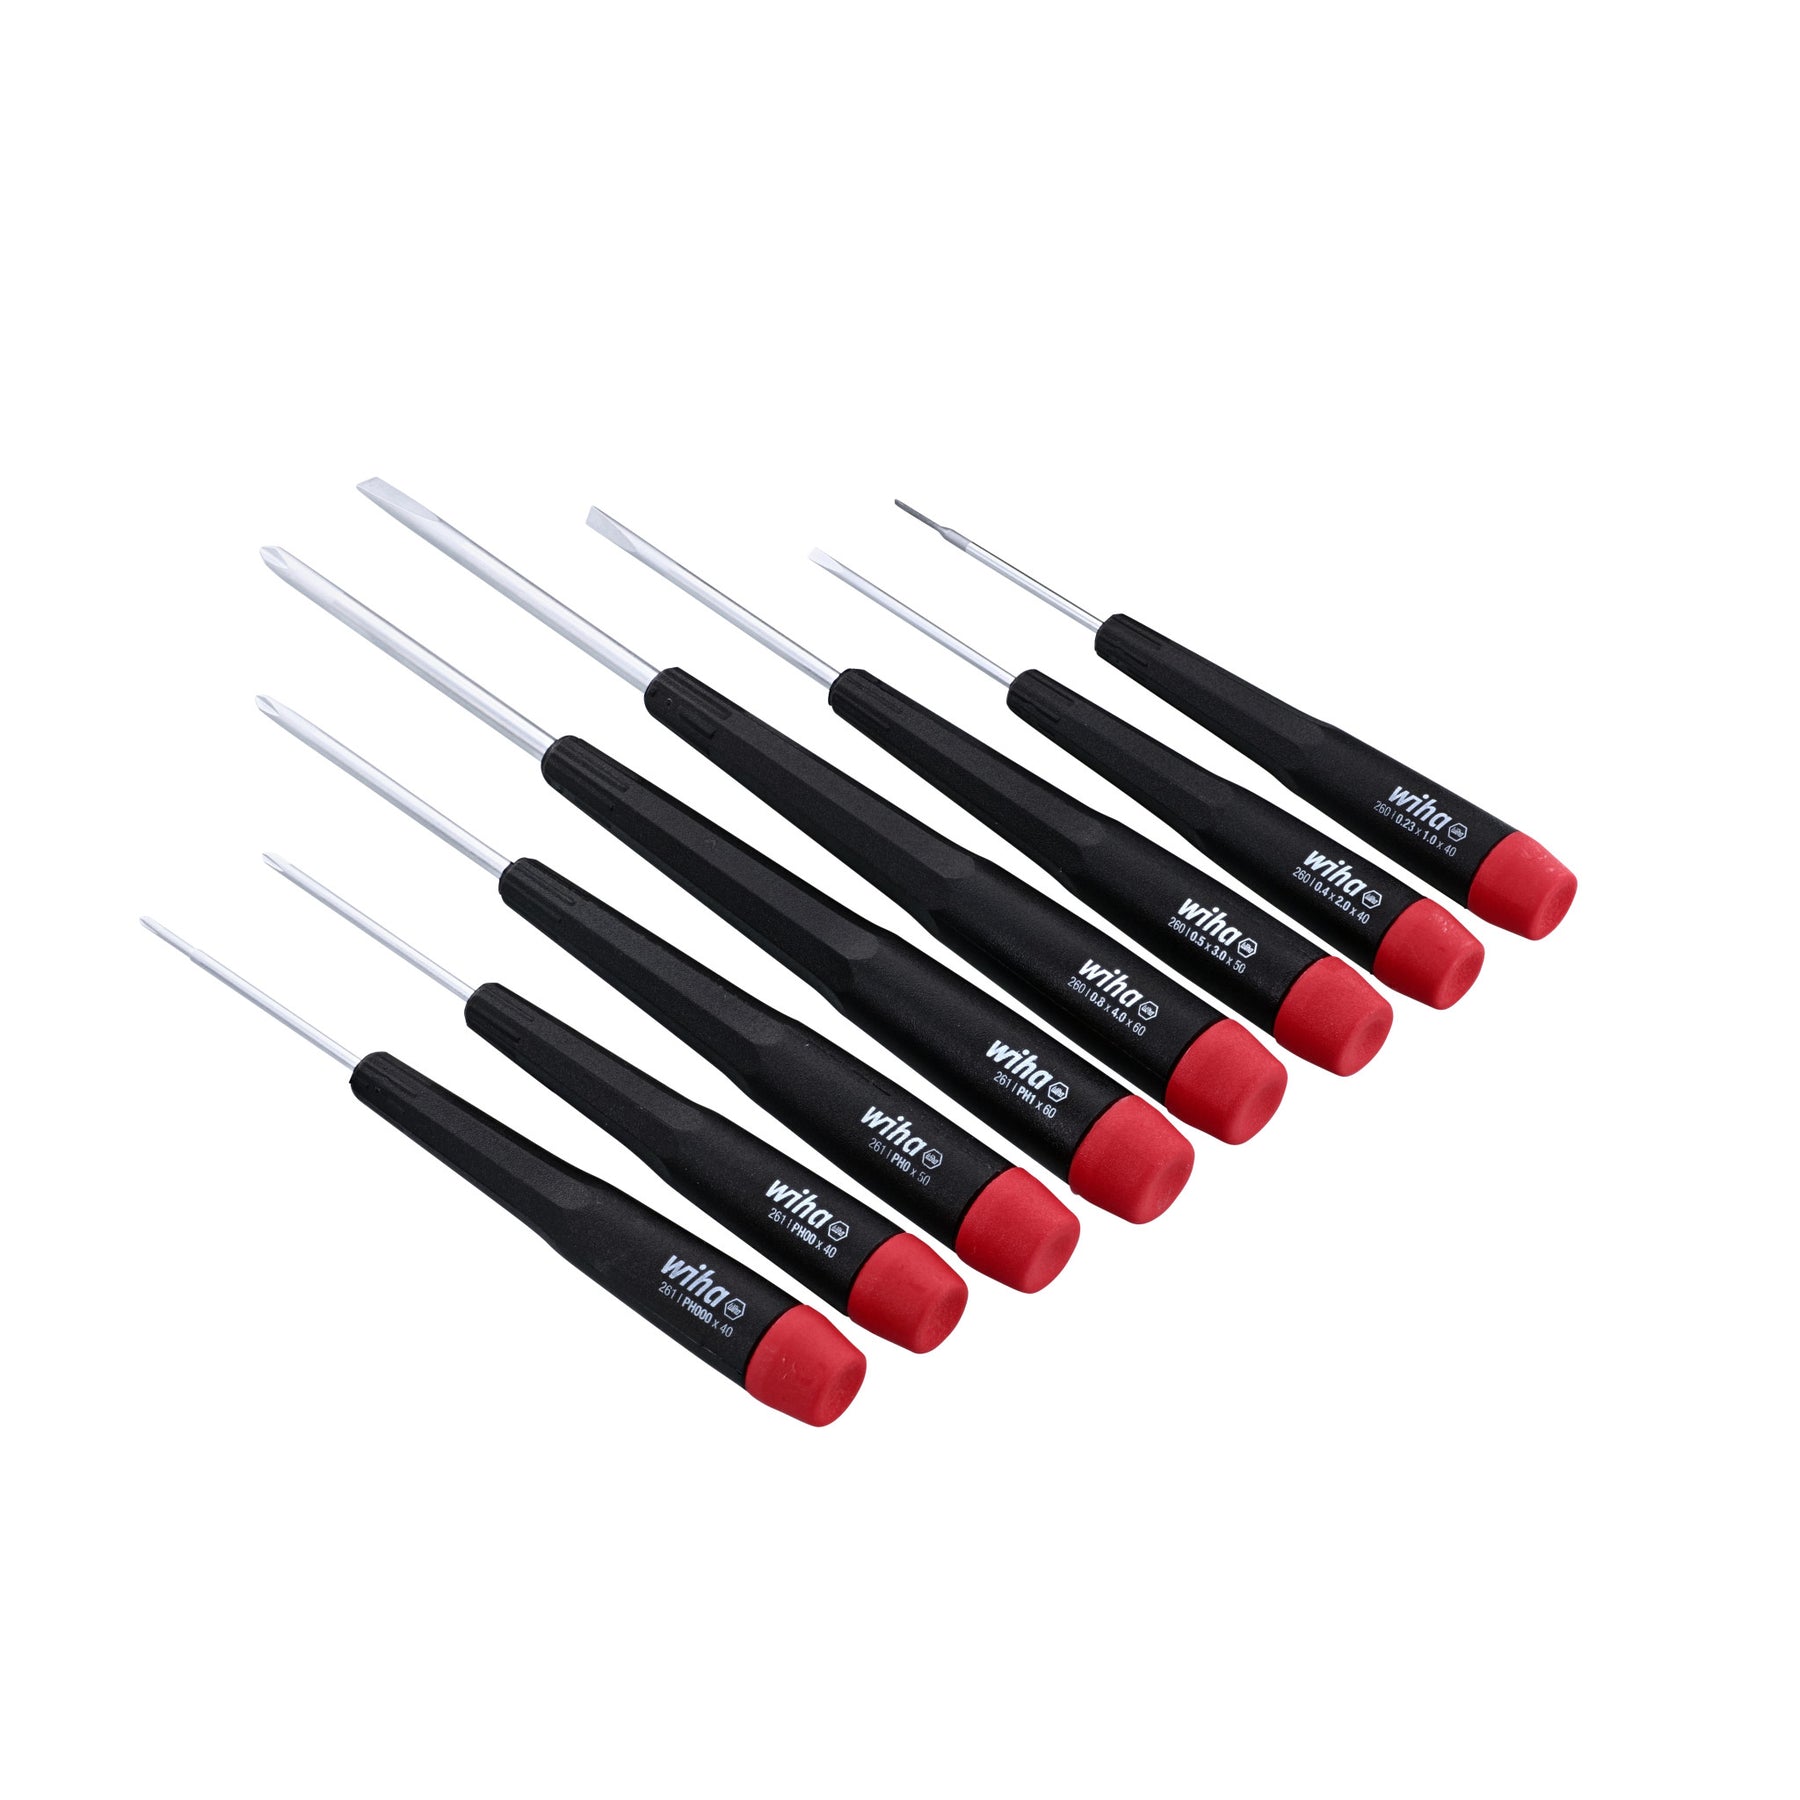 8 Piece Precision Slotted and Phillips Screwdriver Set